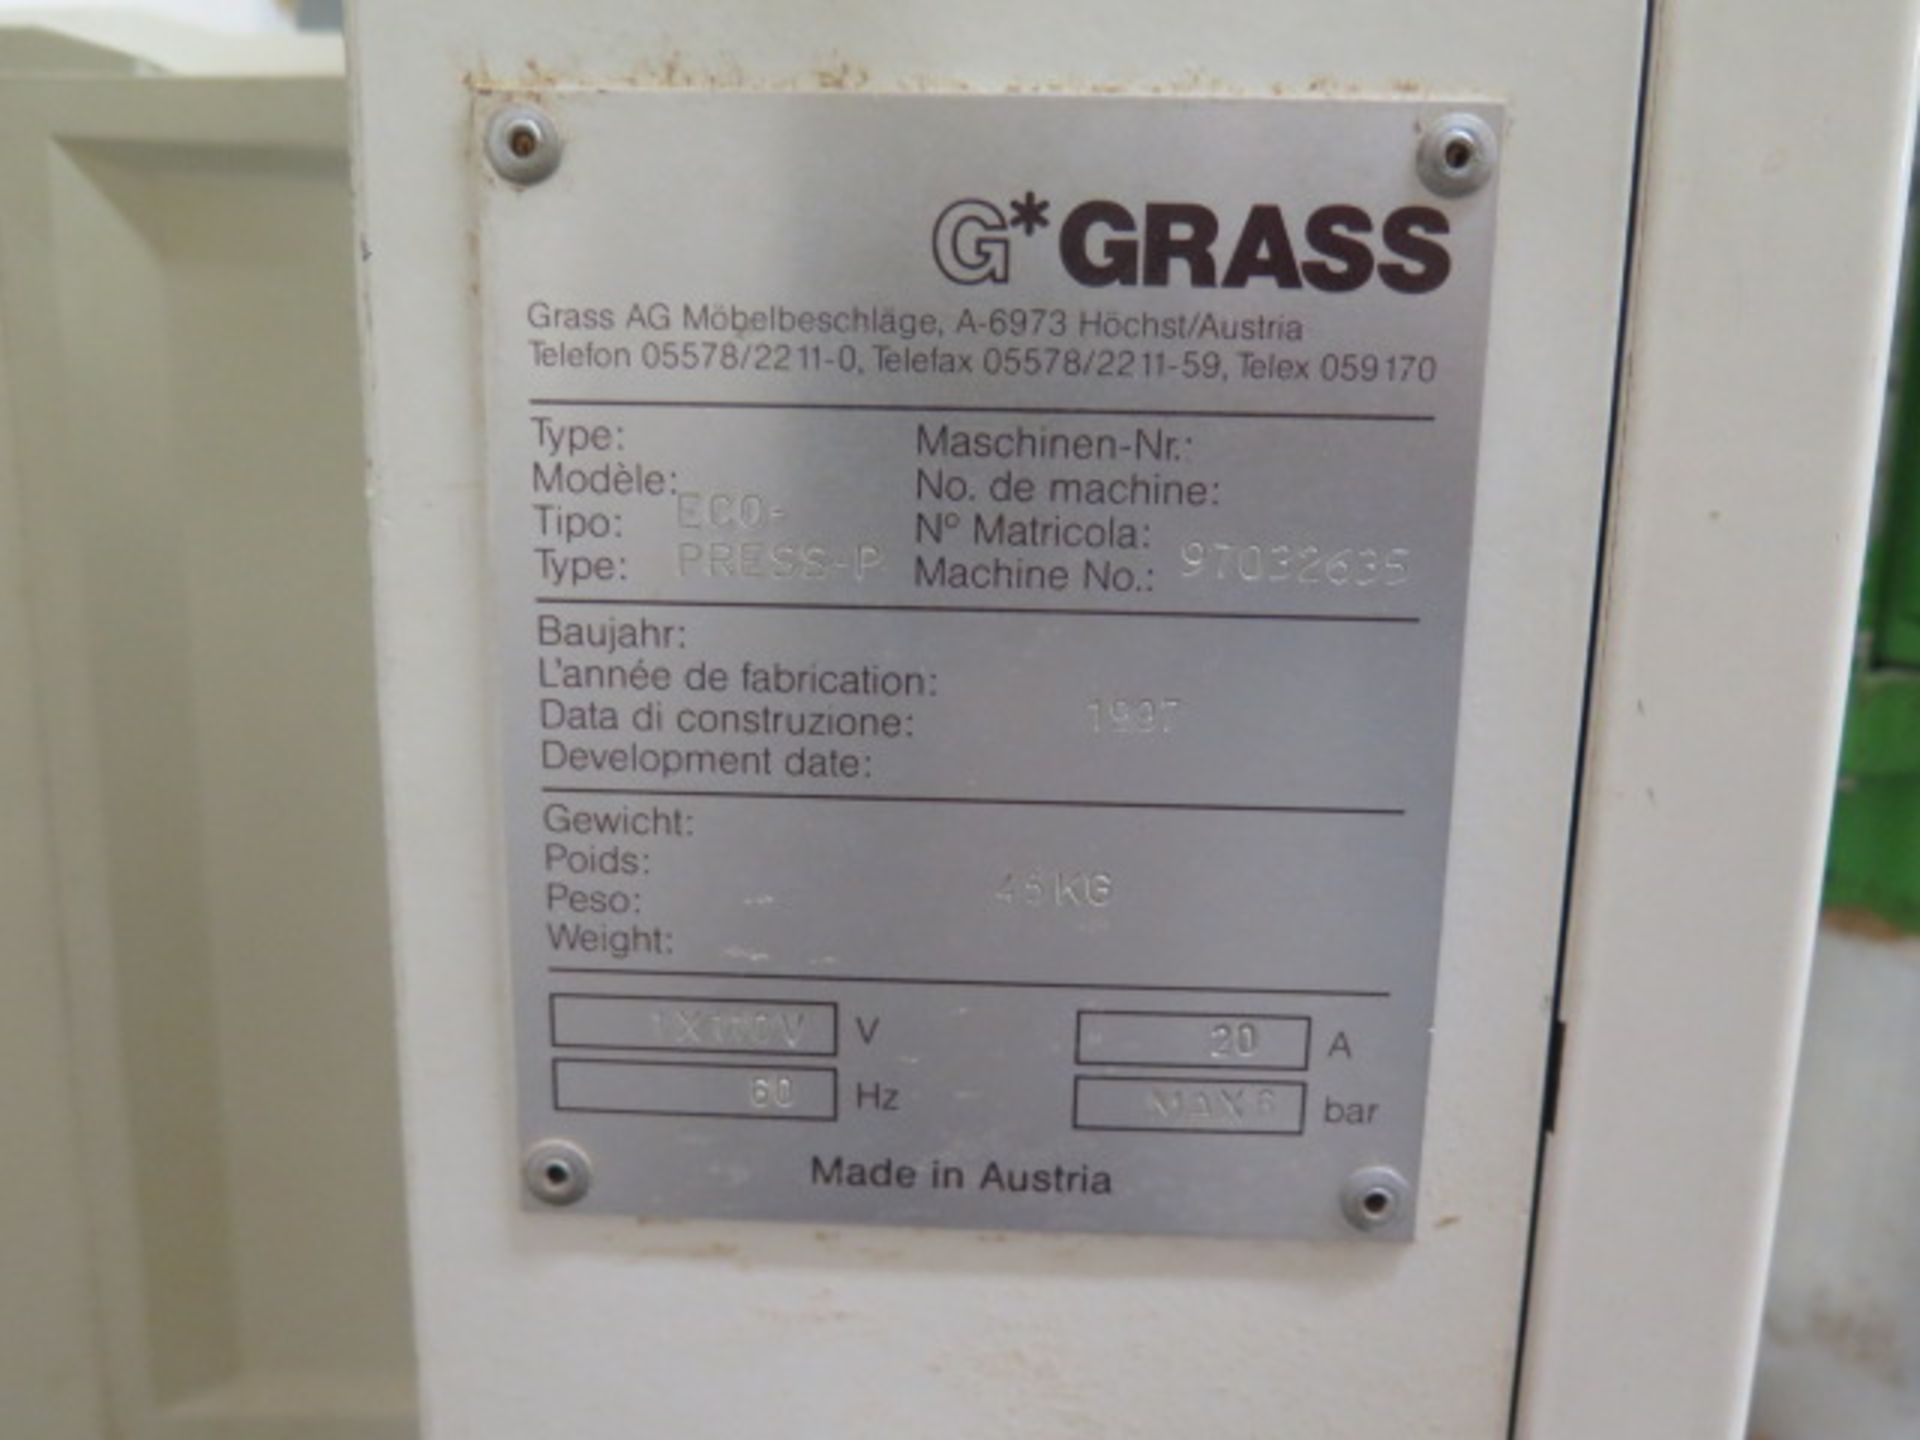 Grass "Eco-Press-P" Pneumatic Hinge Router s/n 97032635 (SOLD AS-IS - NO WARRANTY) - Image 11 of 11